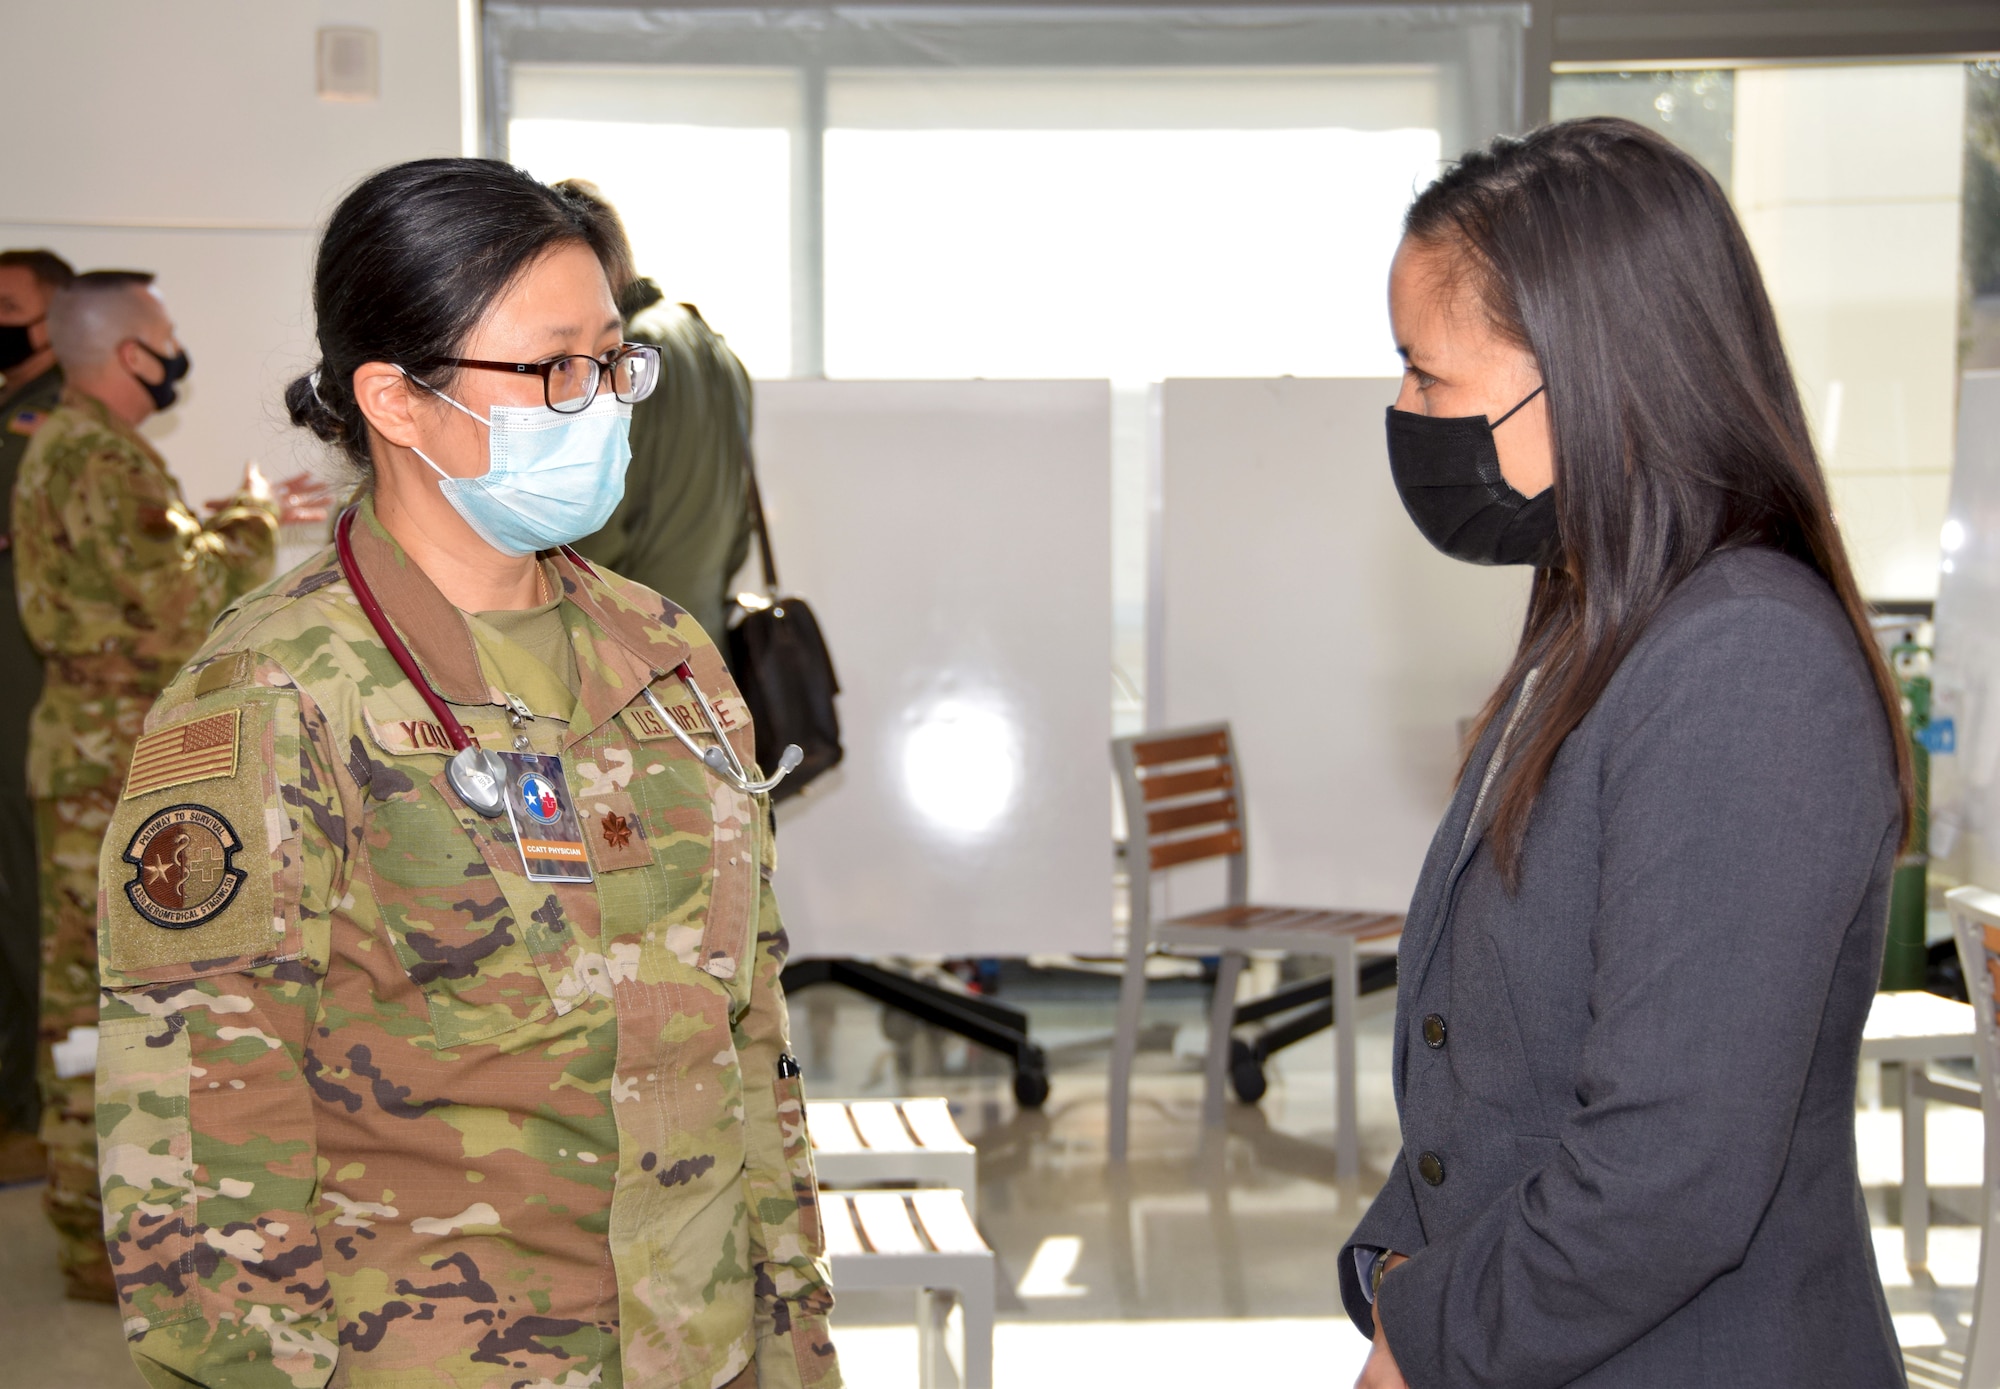 Maj. Alisha Young, 433rd Aeromedical Staging Squadron critical care air transport team physician, speaks with Under Secretary of the Air Force Gina Ortiz Jones during her visit to 433rd Airlift Wing members at Wilford Hall Ambulatory Surgical Center, Joint Base San Antonio-Lackland, Texas, Oct. 2, 2021. (U.S. Air Force photo by Tech. Sgt. Samantha Mathison)